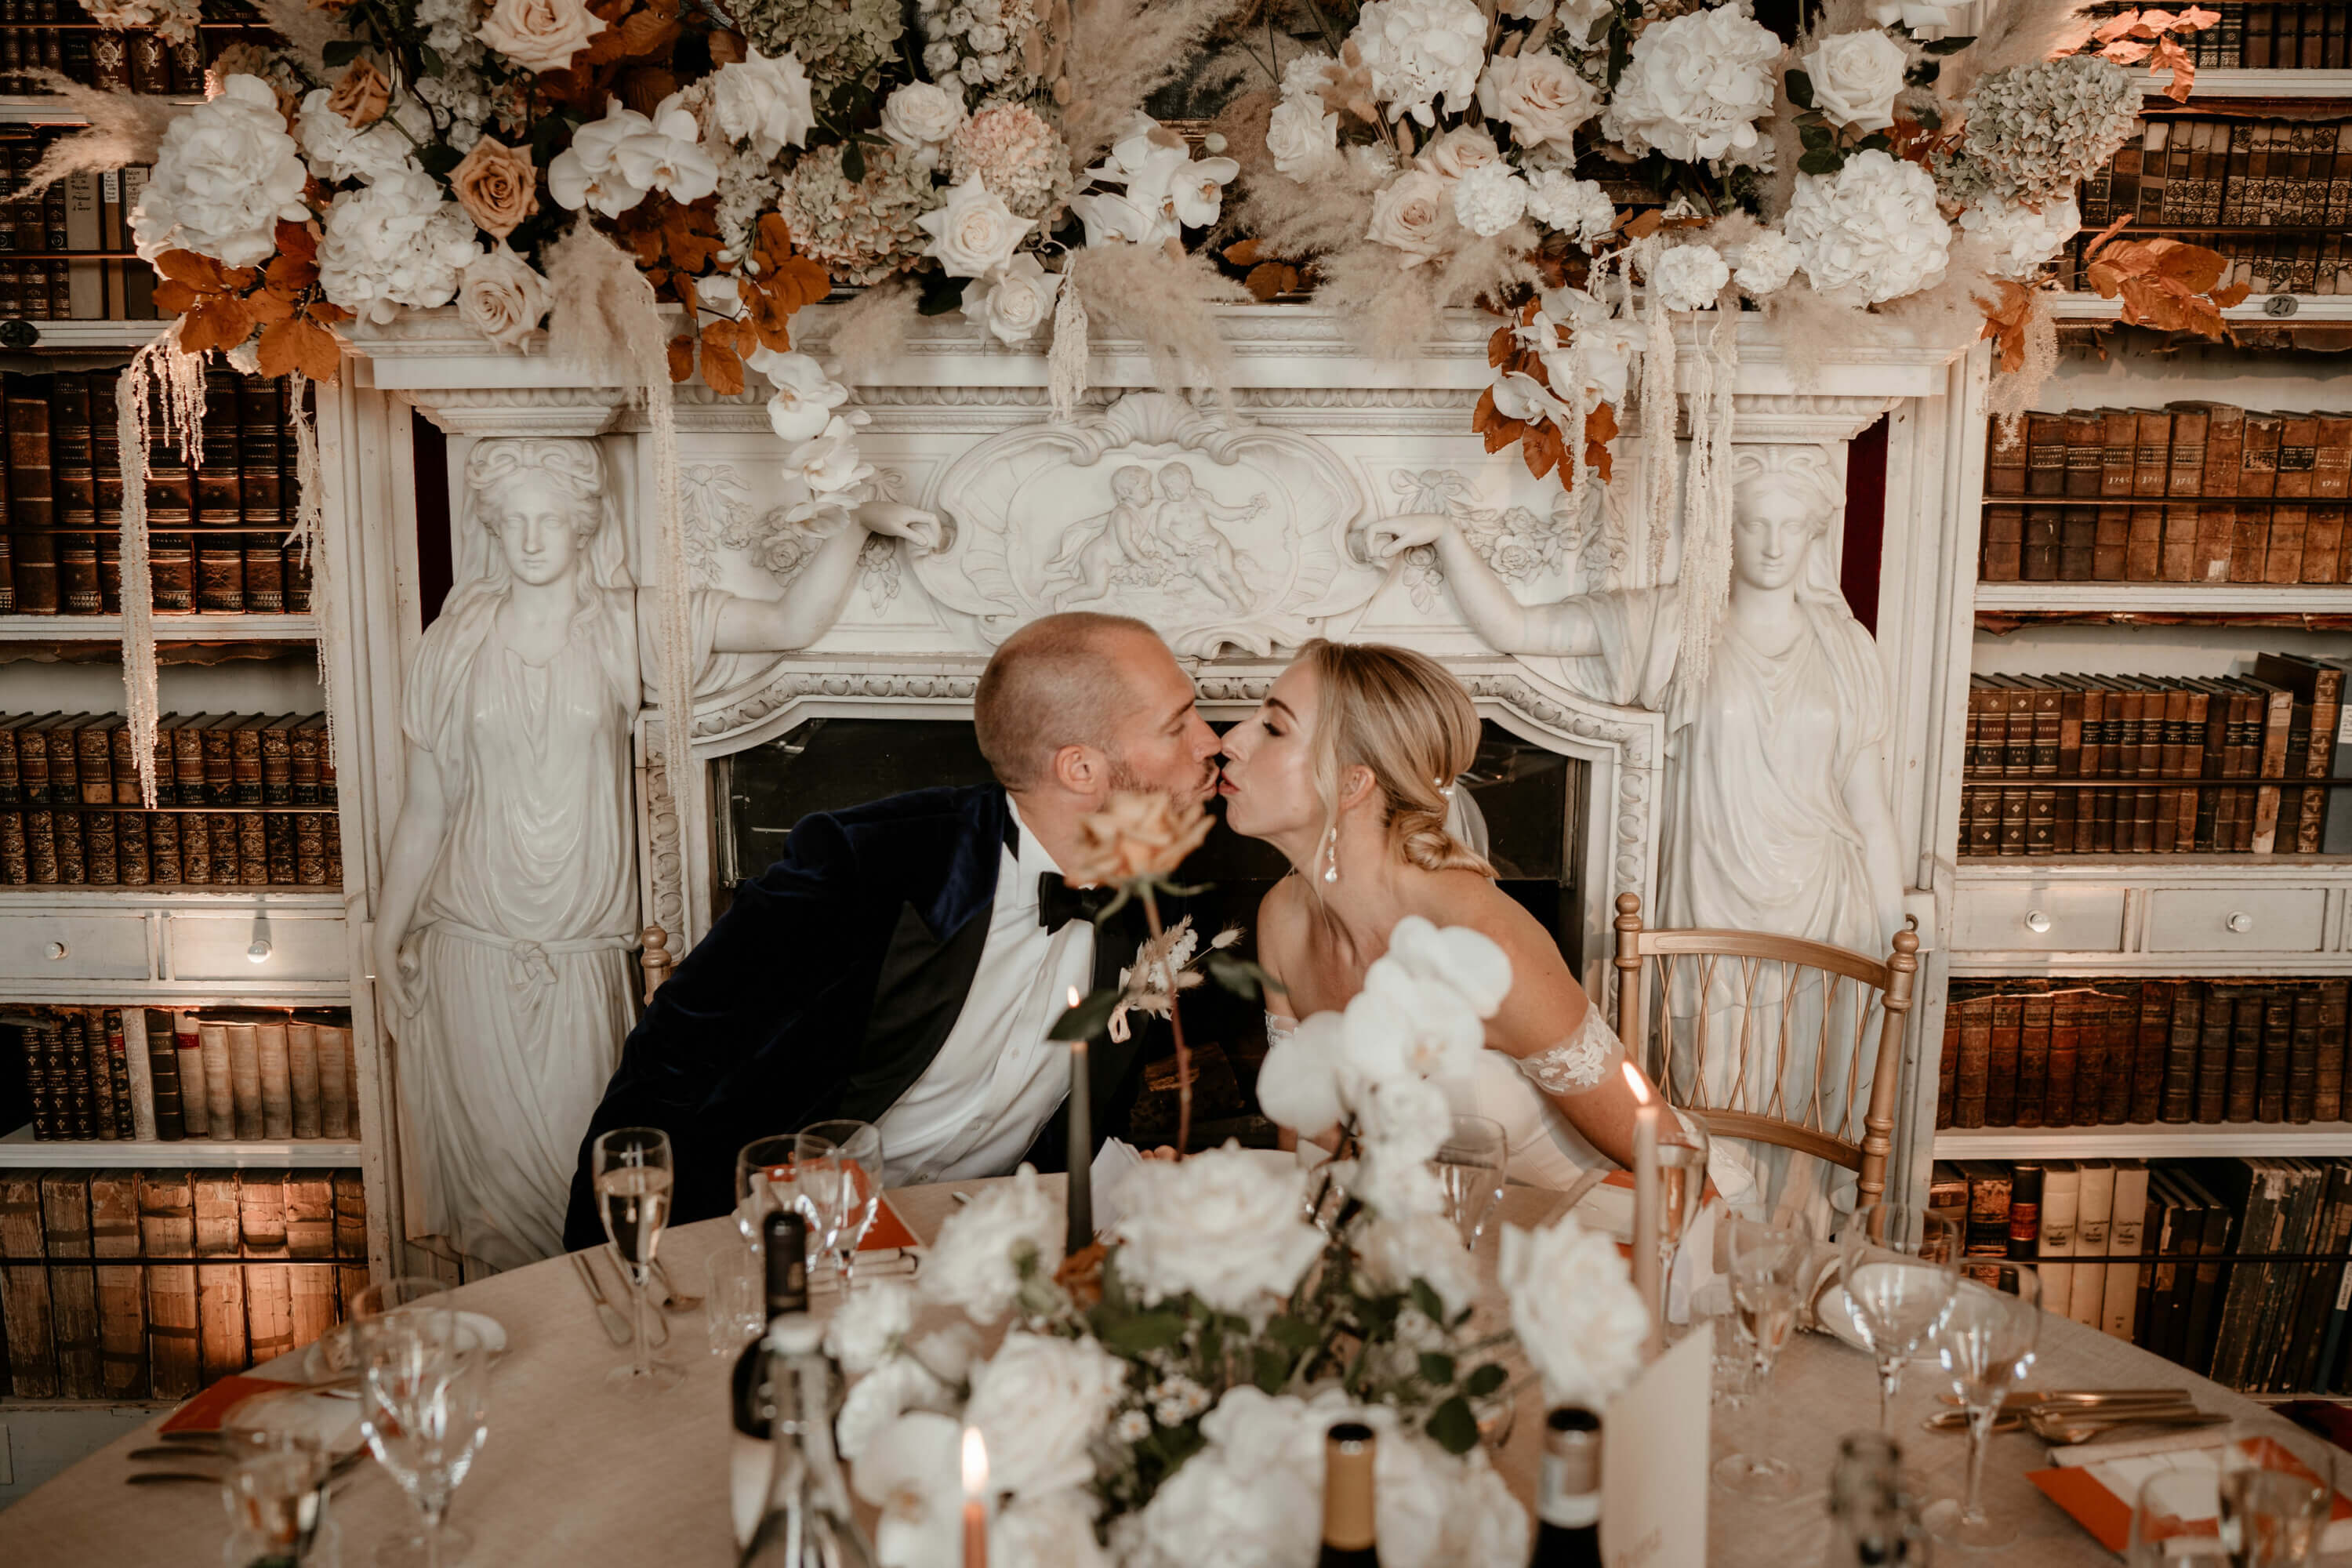 A bride and groom kiss in front of a floral adorned fireplace at their wedding breakfast